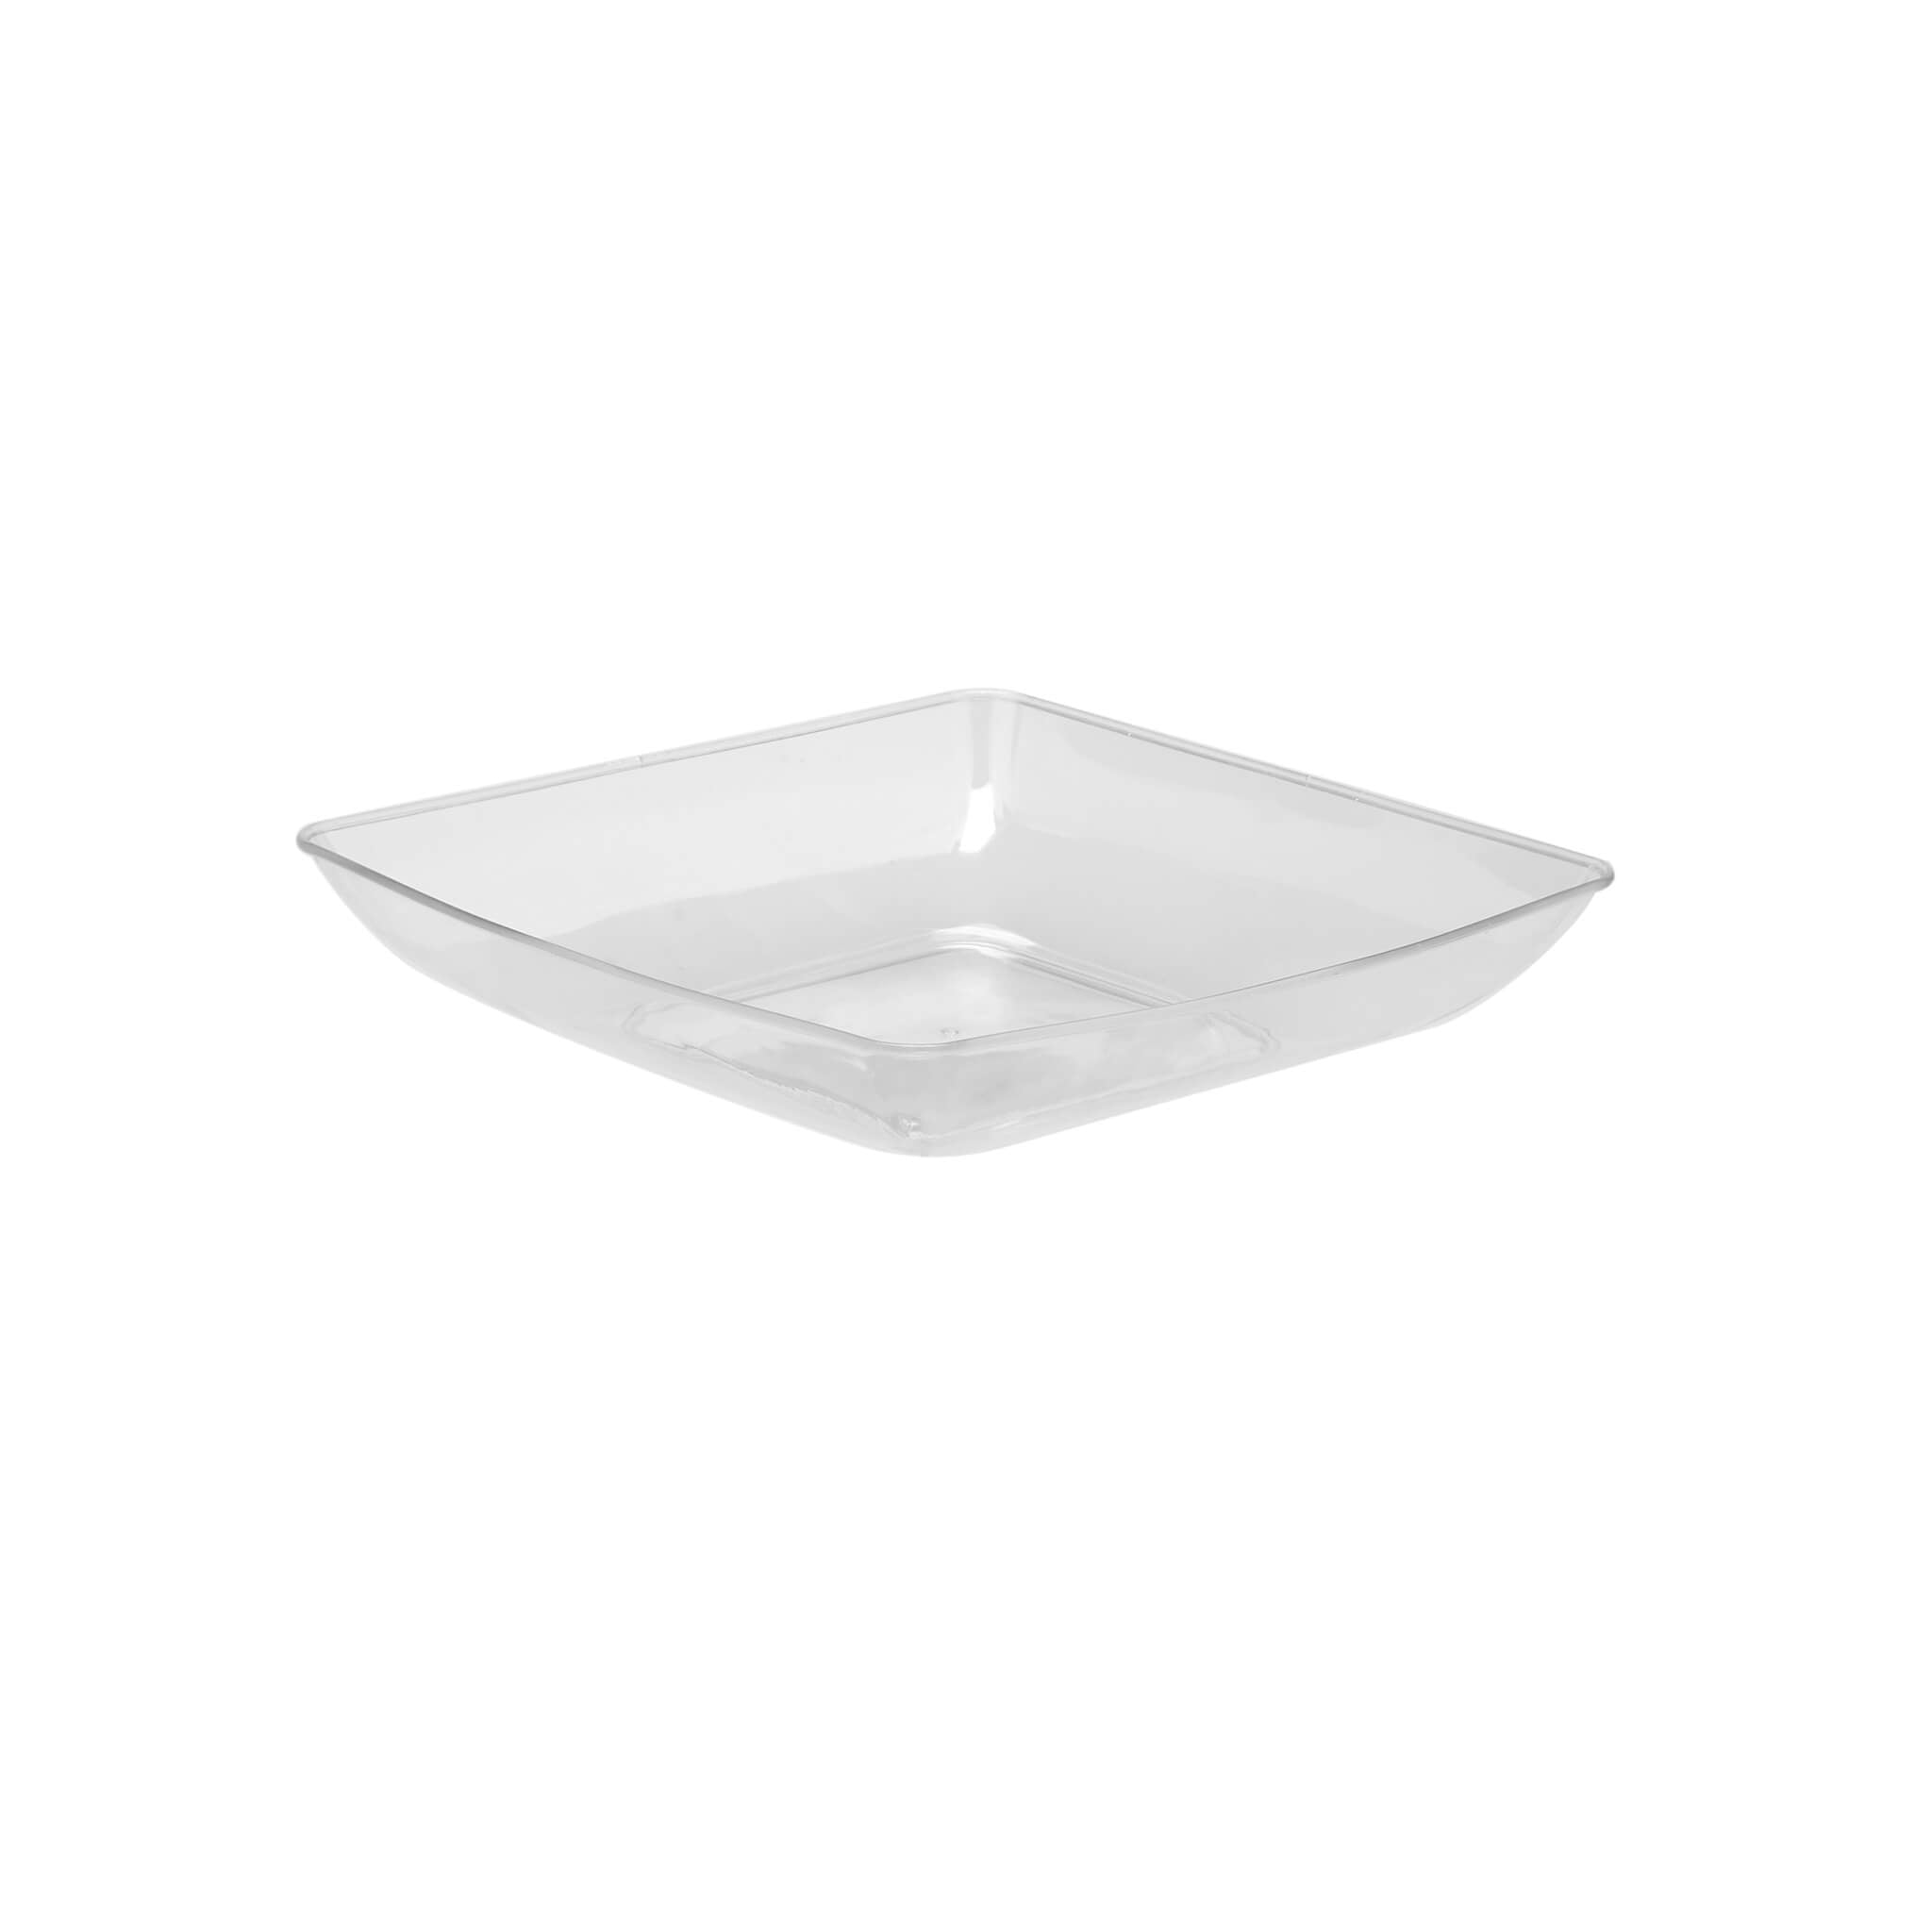 Premium Square Deep Clear Plate 6 Pieces - Hotpack Global